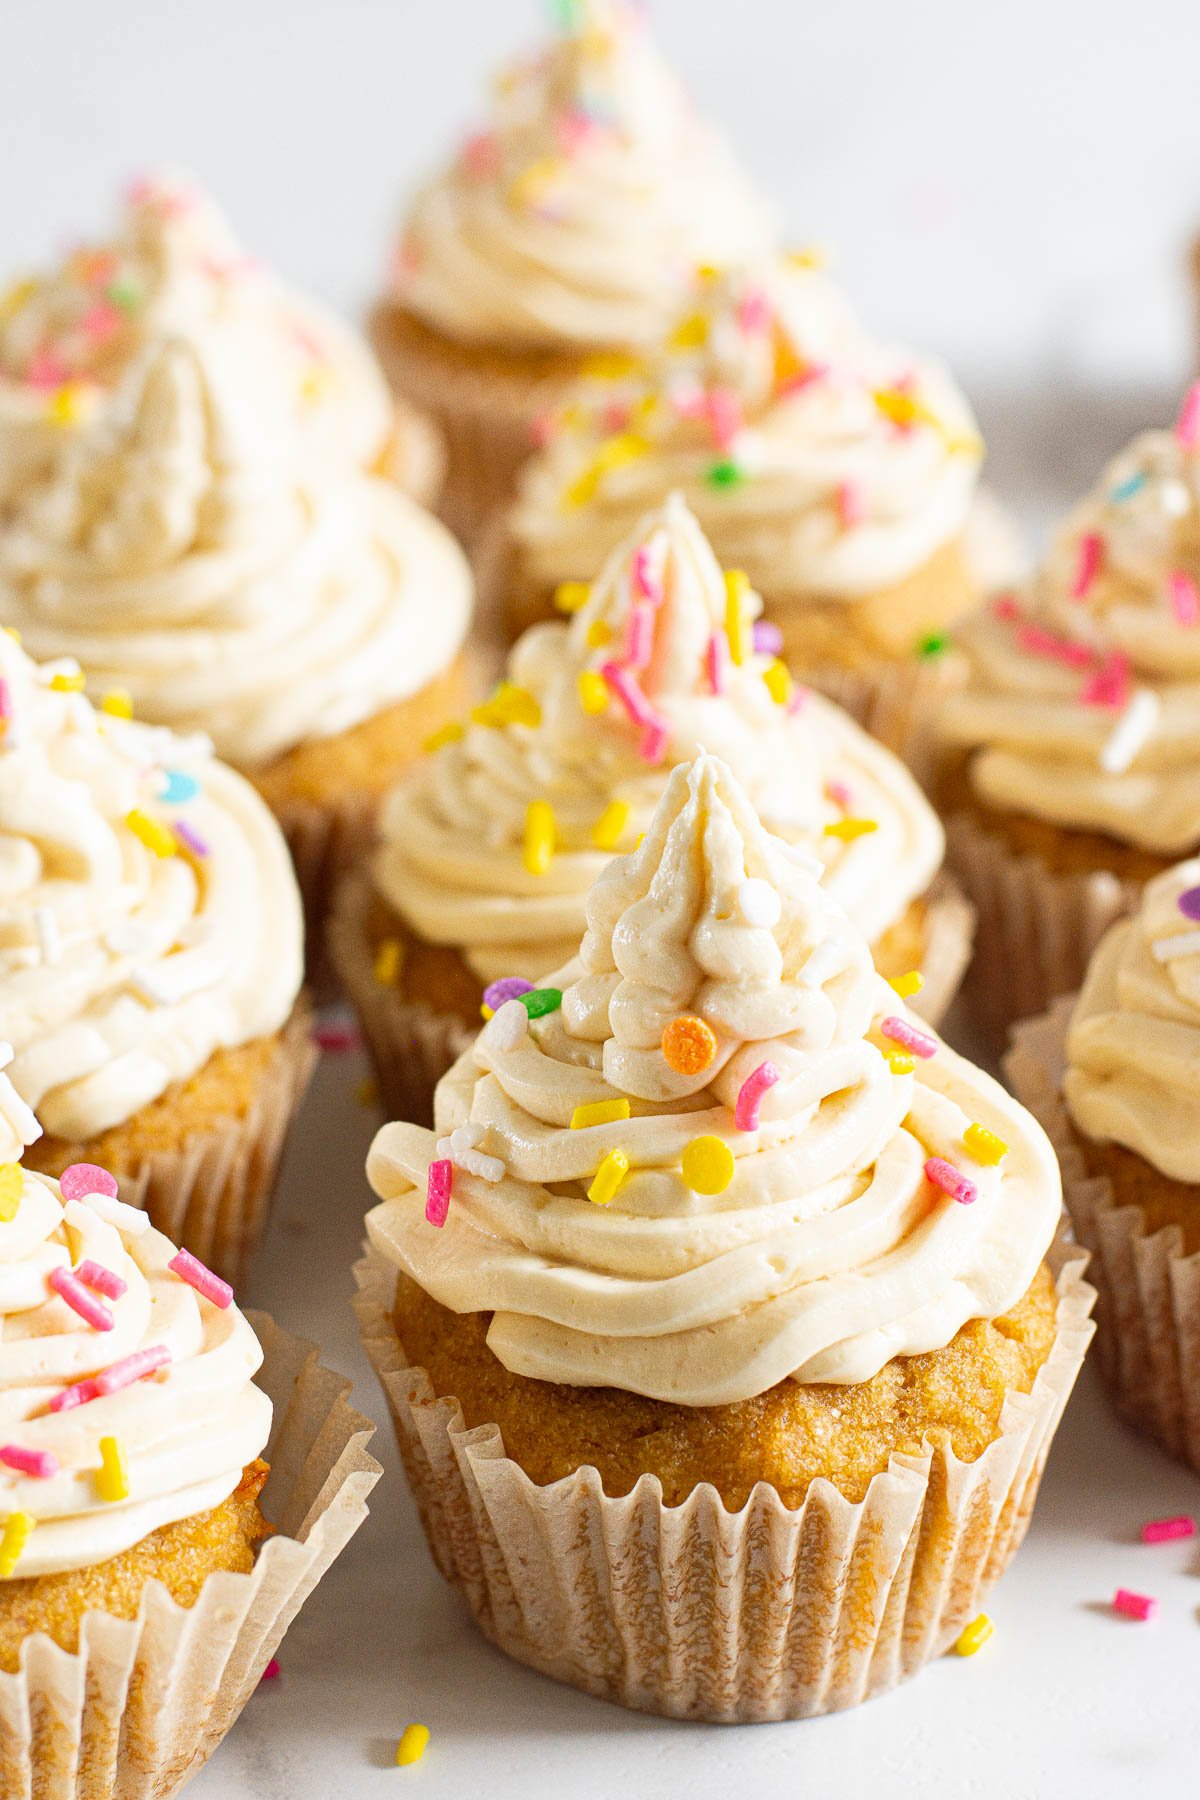 Healthy cupcakes topped with buttercream frosting and sprinkles.